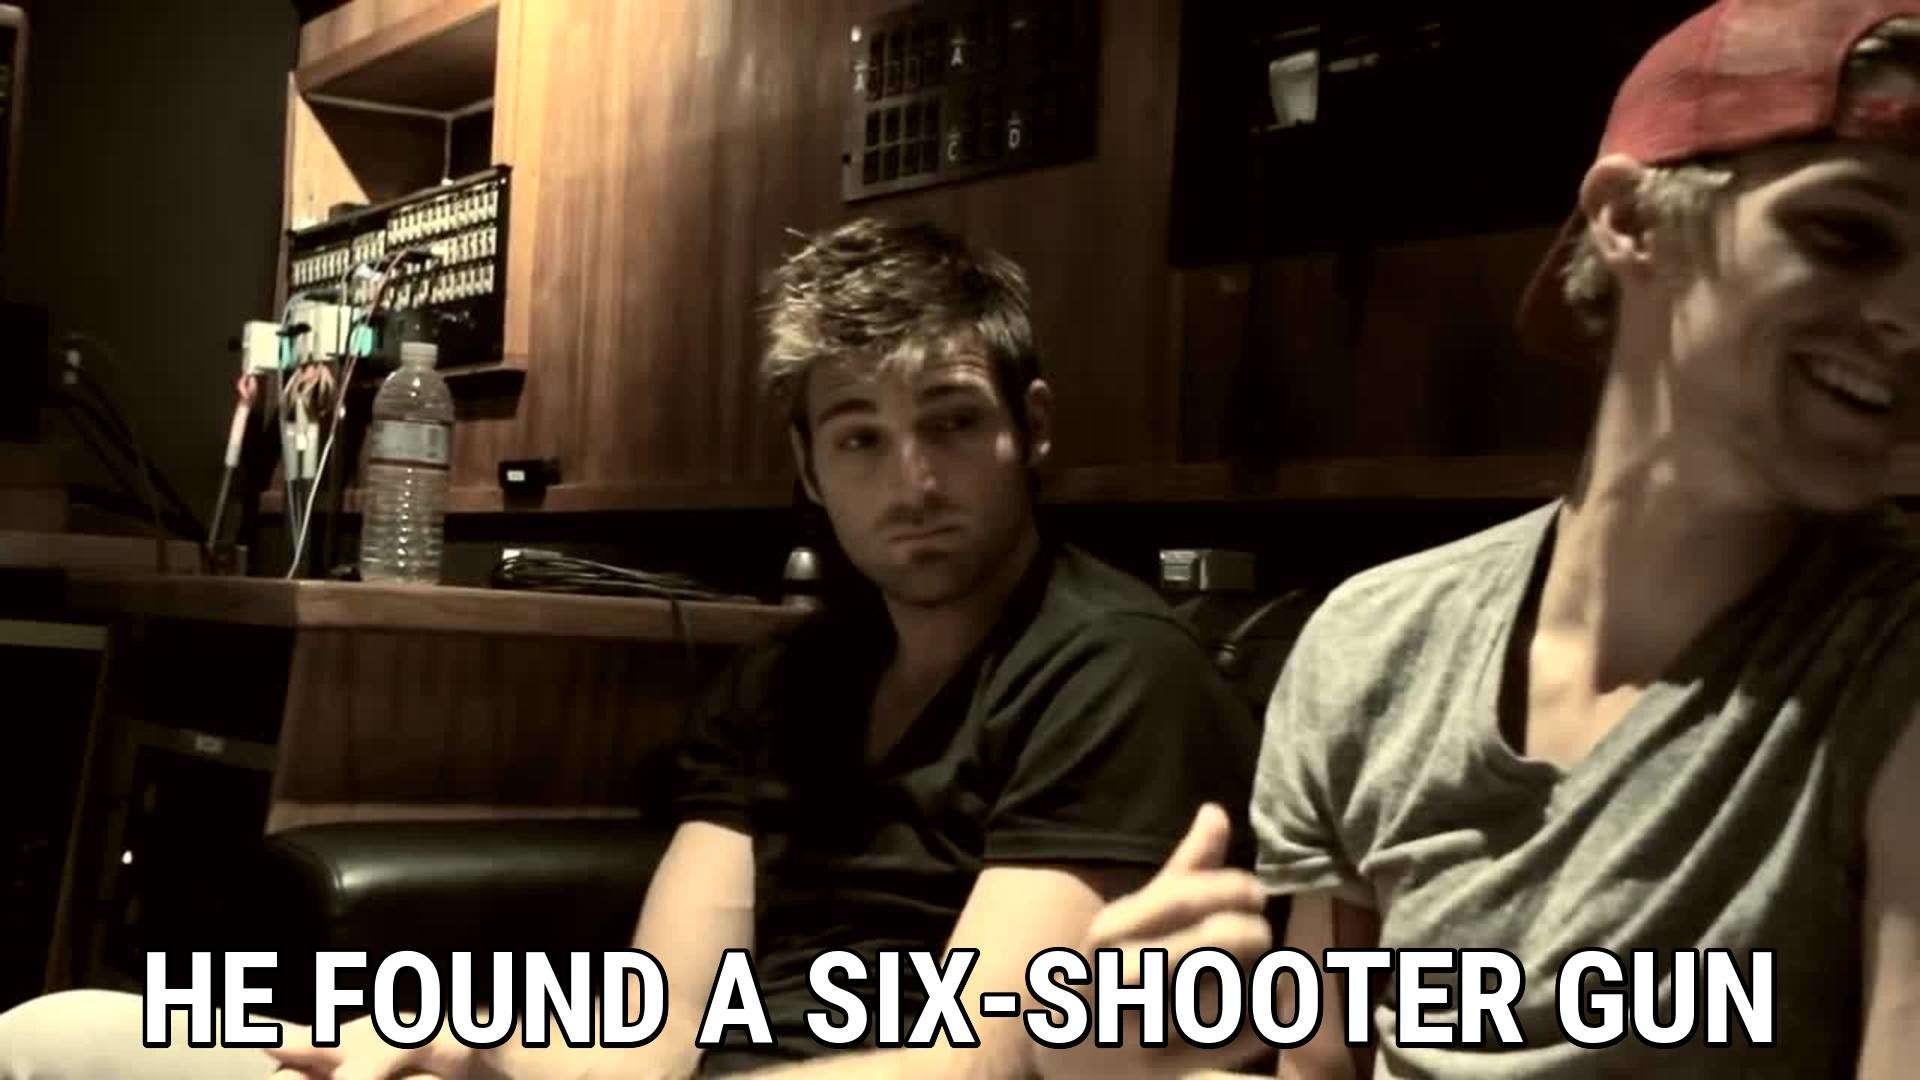 1920x1080 ... Foster the People He found a six-shooter gun